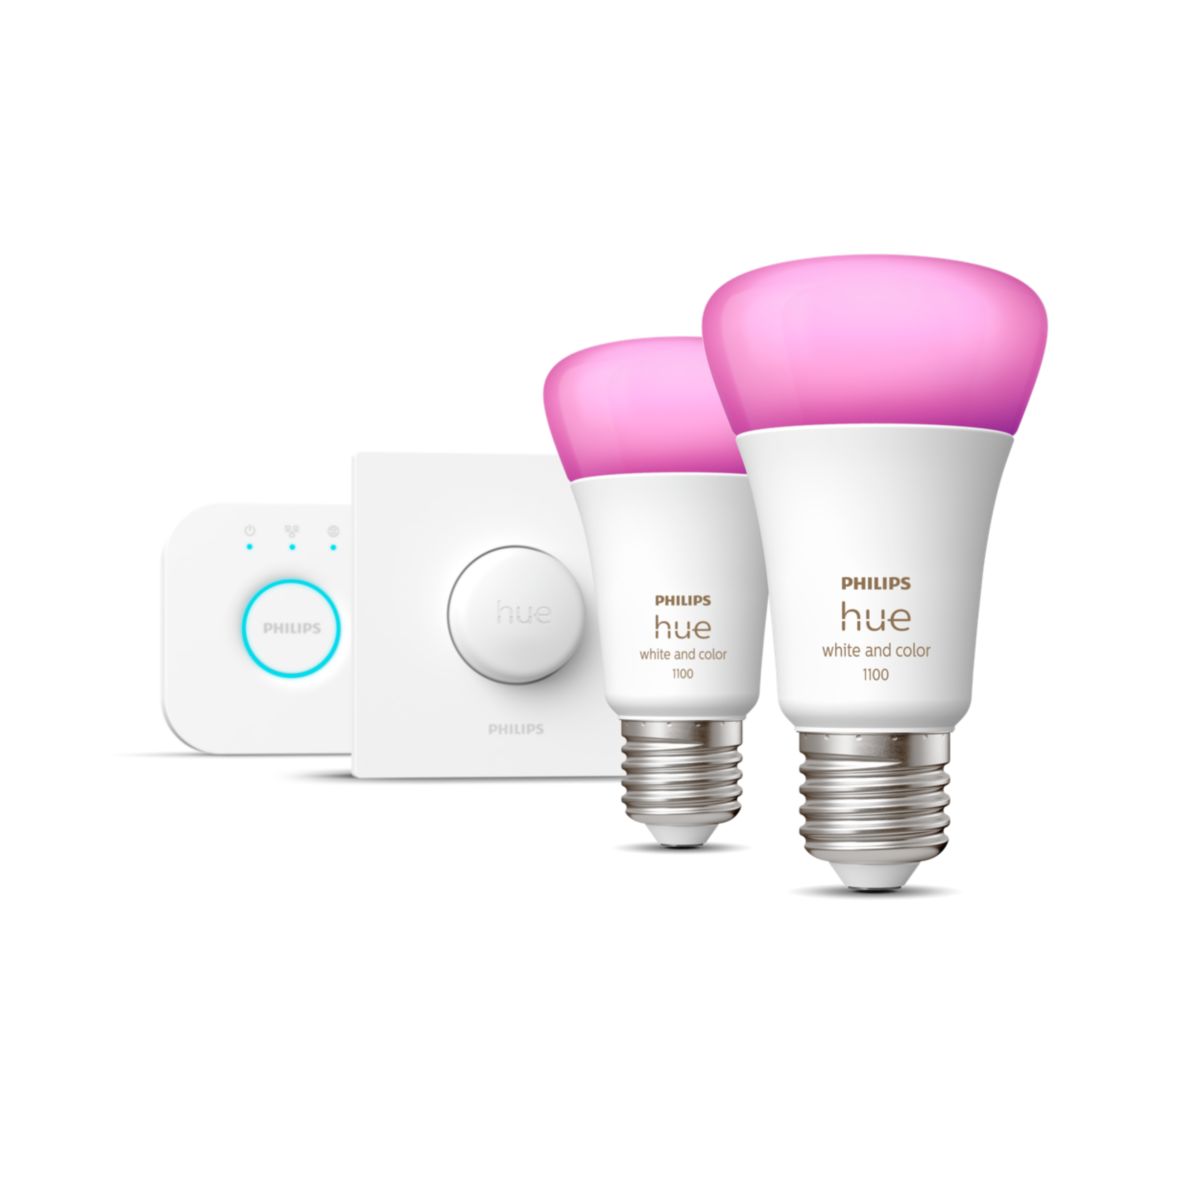 Philips Hue starterkit e27 white and color ambiance 1100lm 2x + smart button